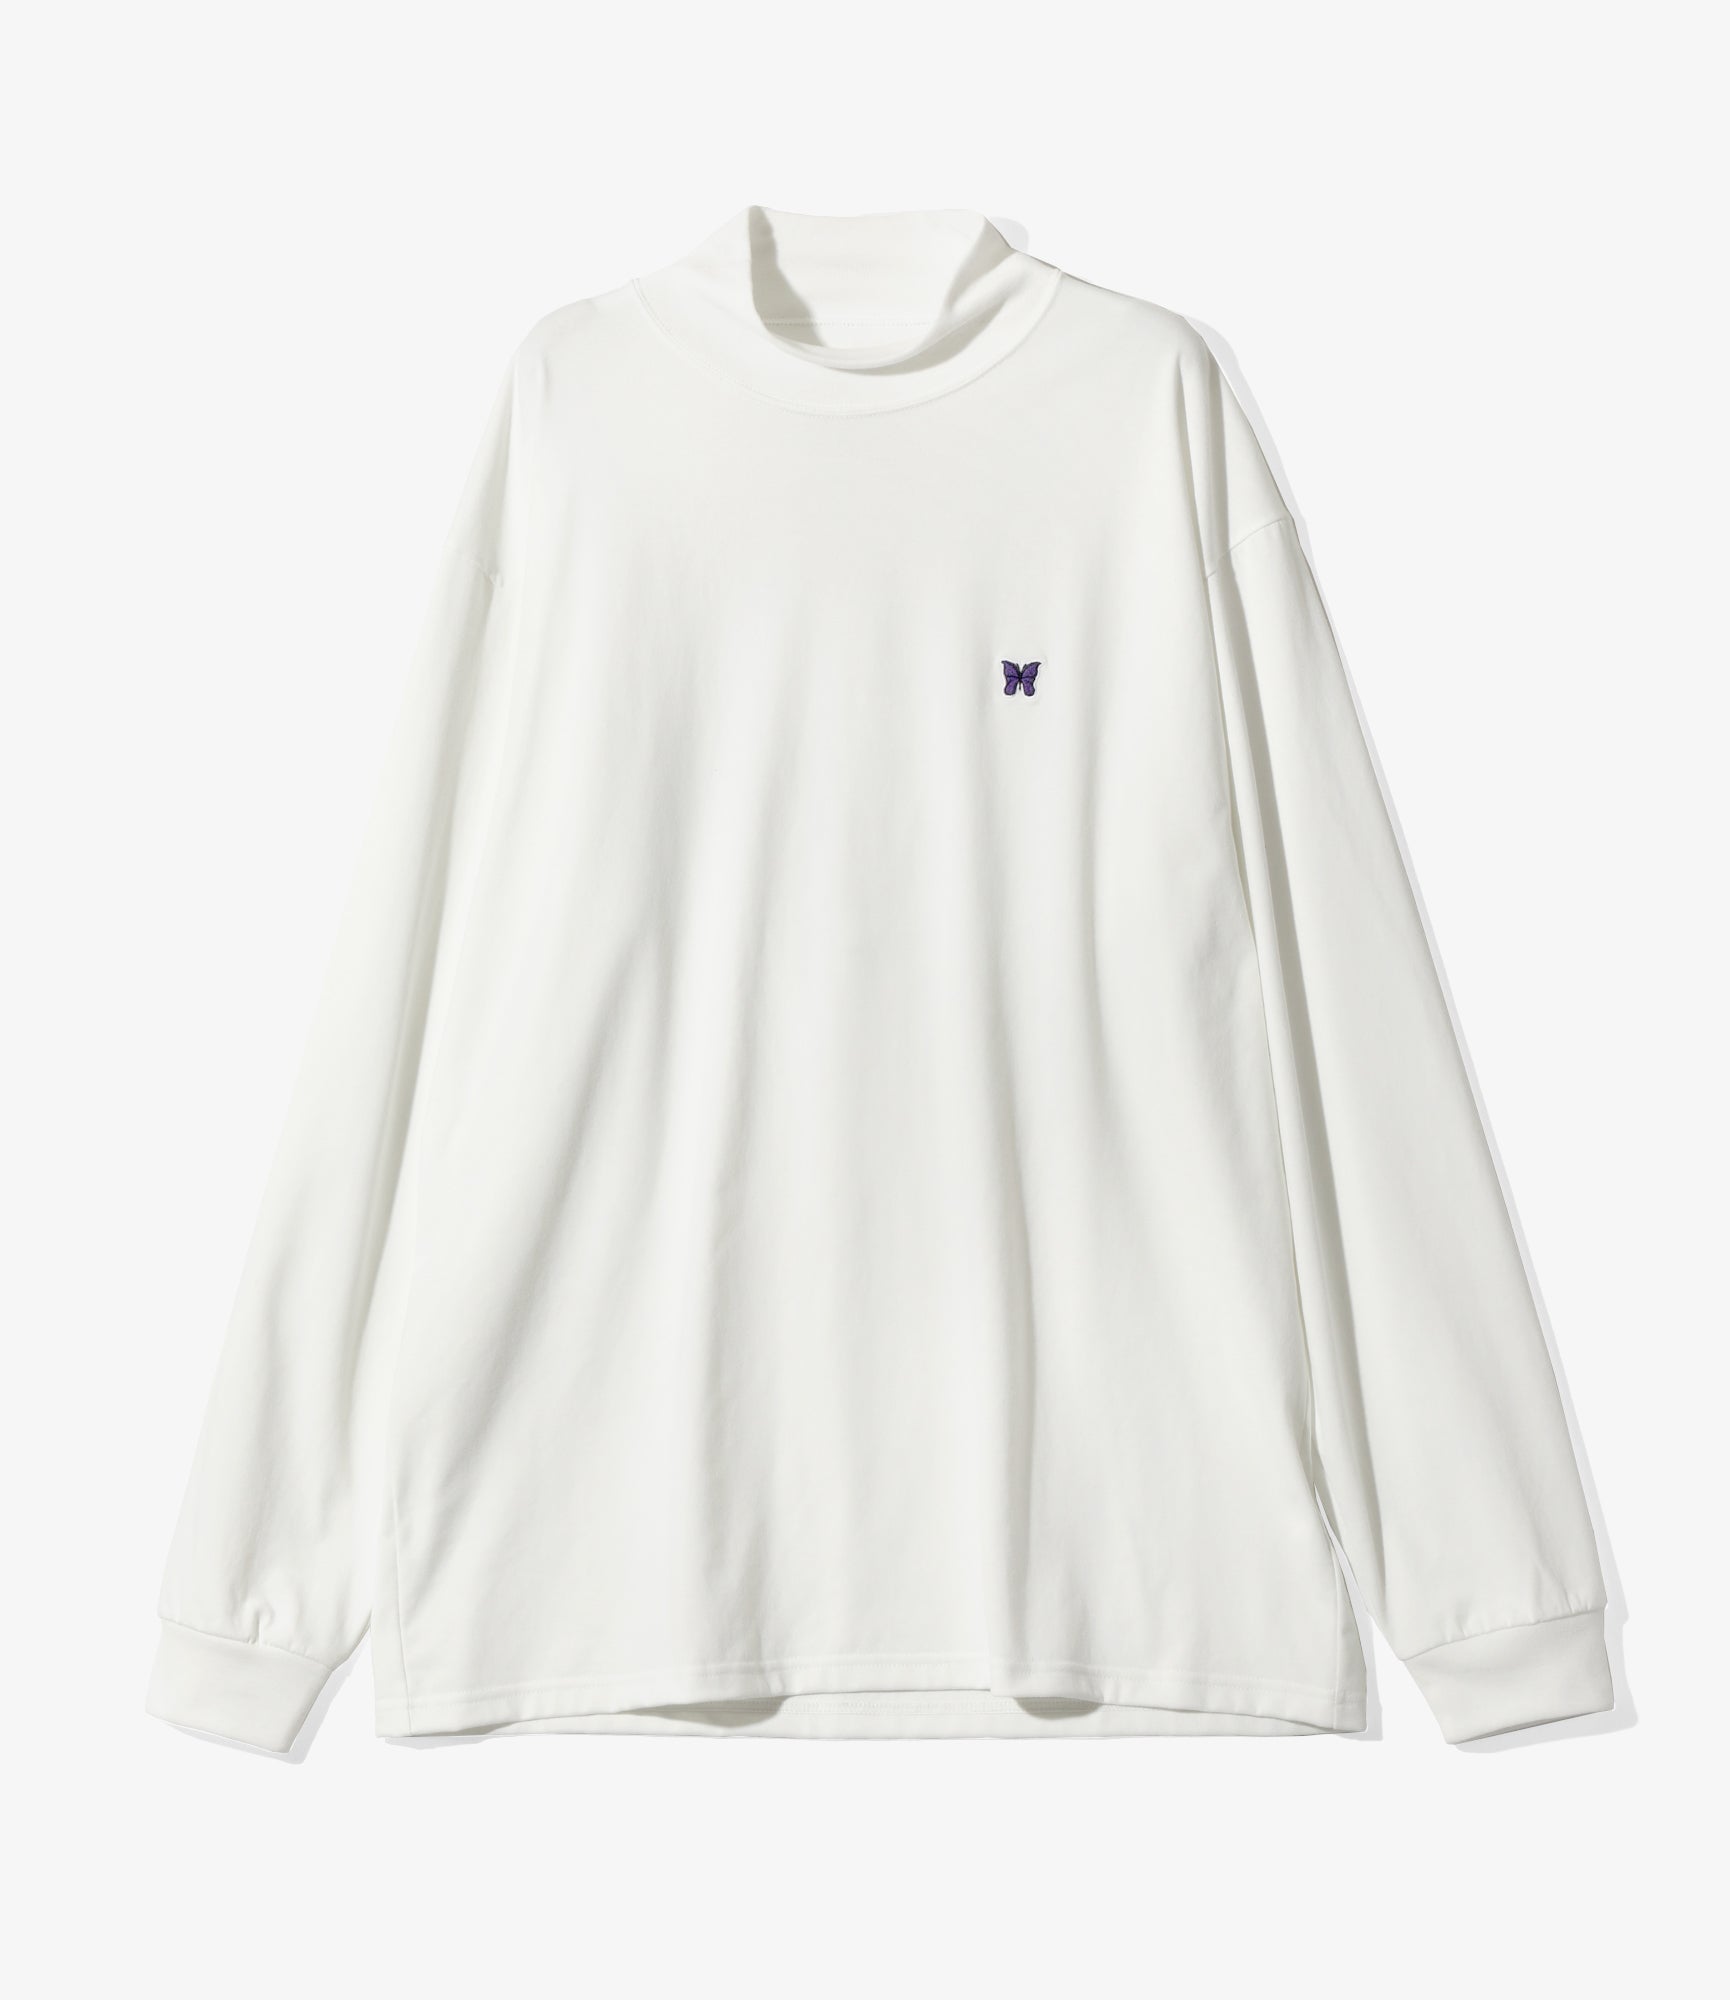 L/S Mock Neck Tee - White - Poly Jersey | Nepenthes New York